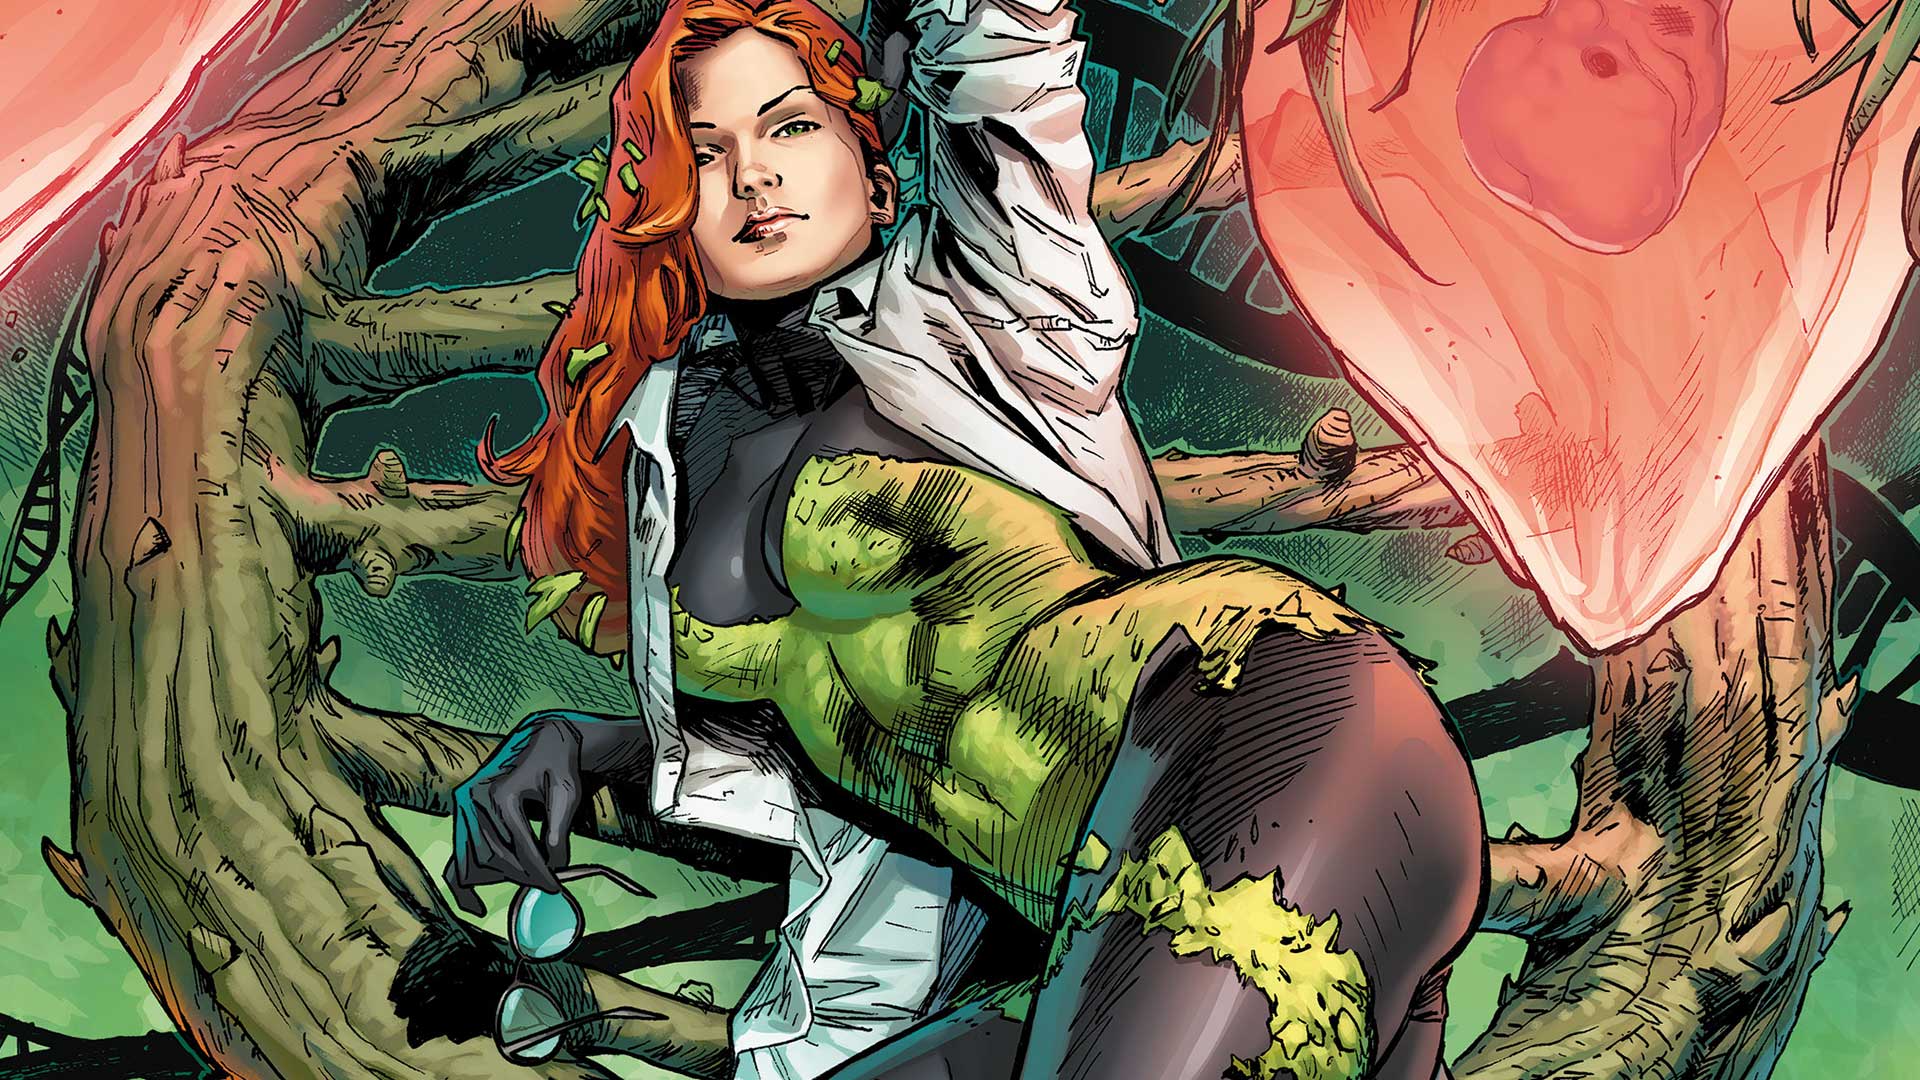 6 Weird Facts About Poison Ivy’s Body We Bet You Didn’t Know